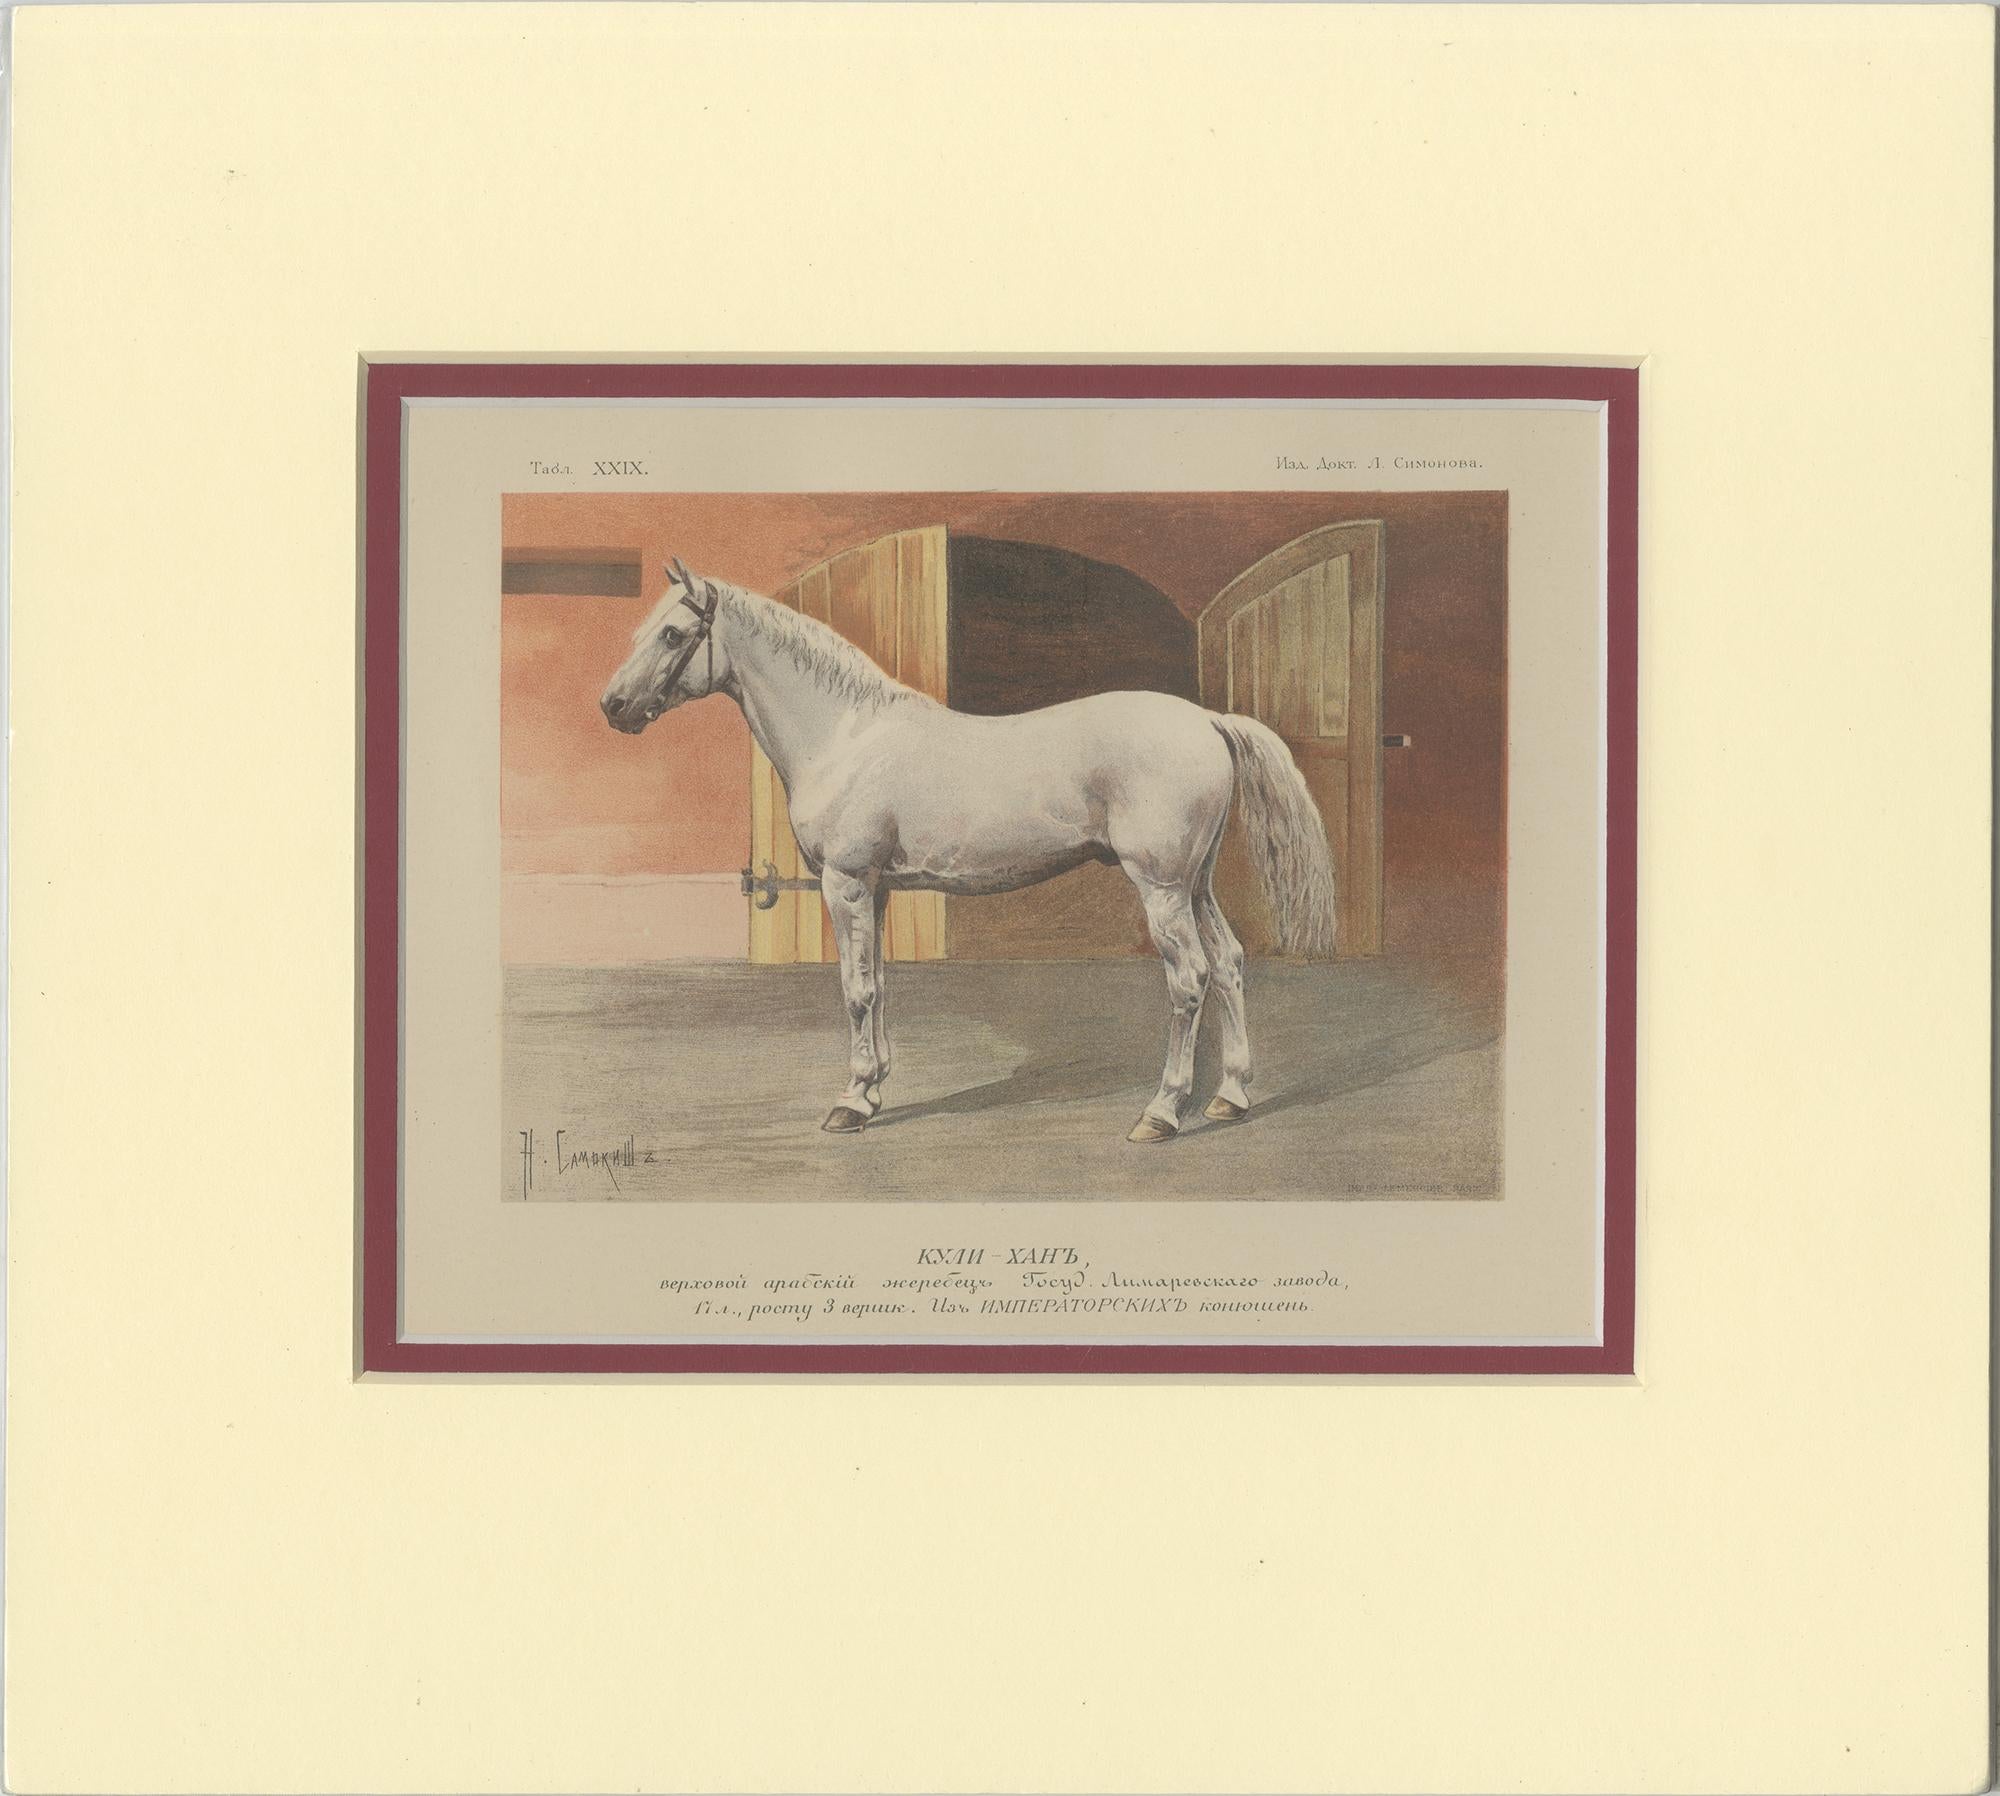 Set of two antique horse prints. These prints originate from a Russian work about horses, published by Simonov & Merder, 1895. The prints were lithographed after drawings by Samokish and Bunin.